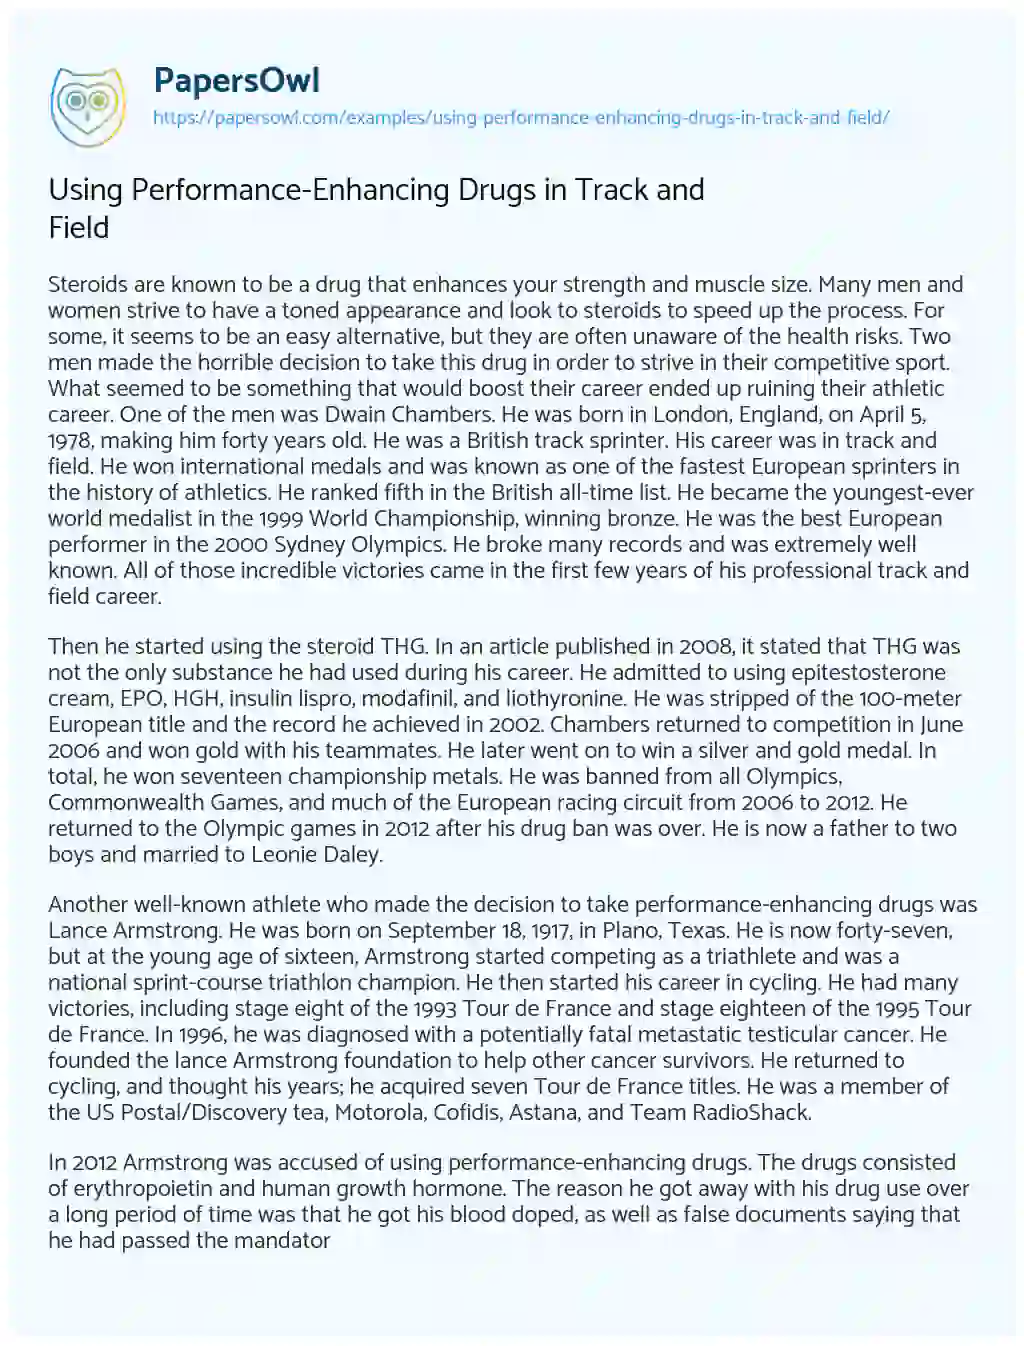 Essay on Using Performance-Enhancing Drugs in Track and Field